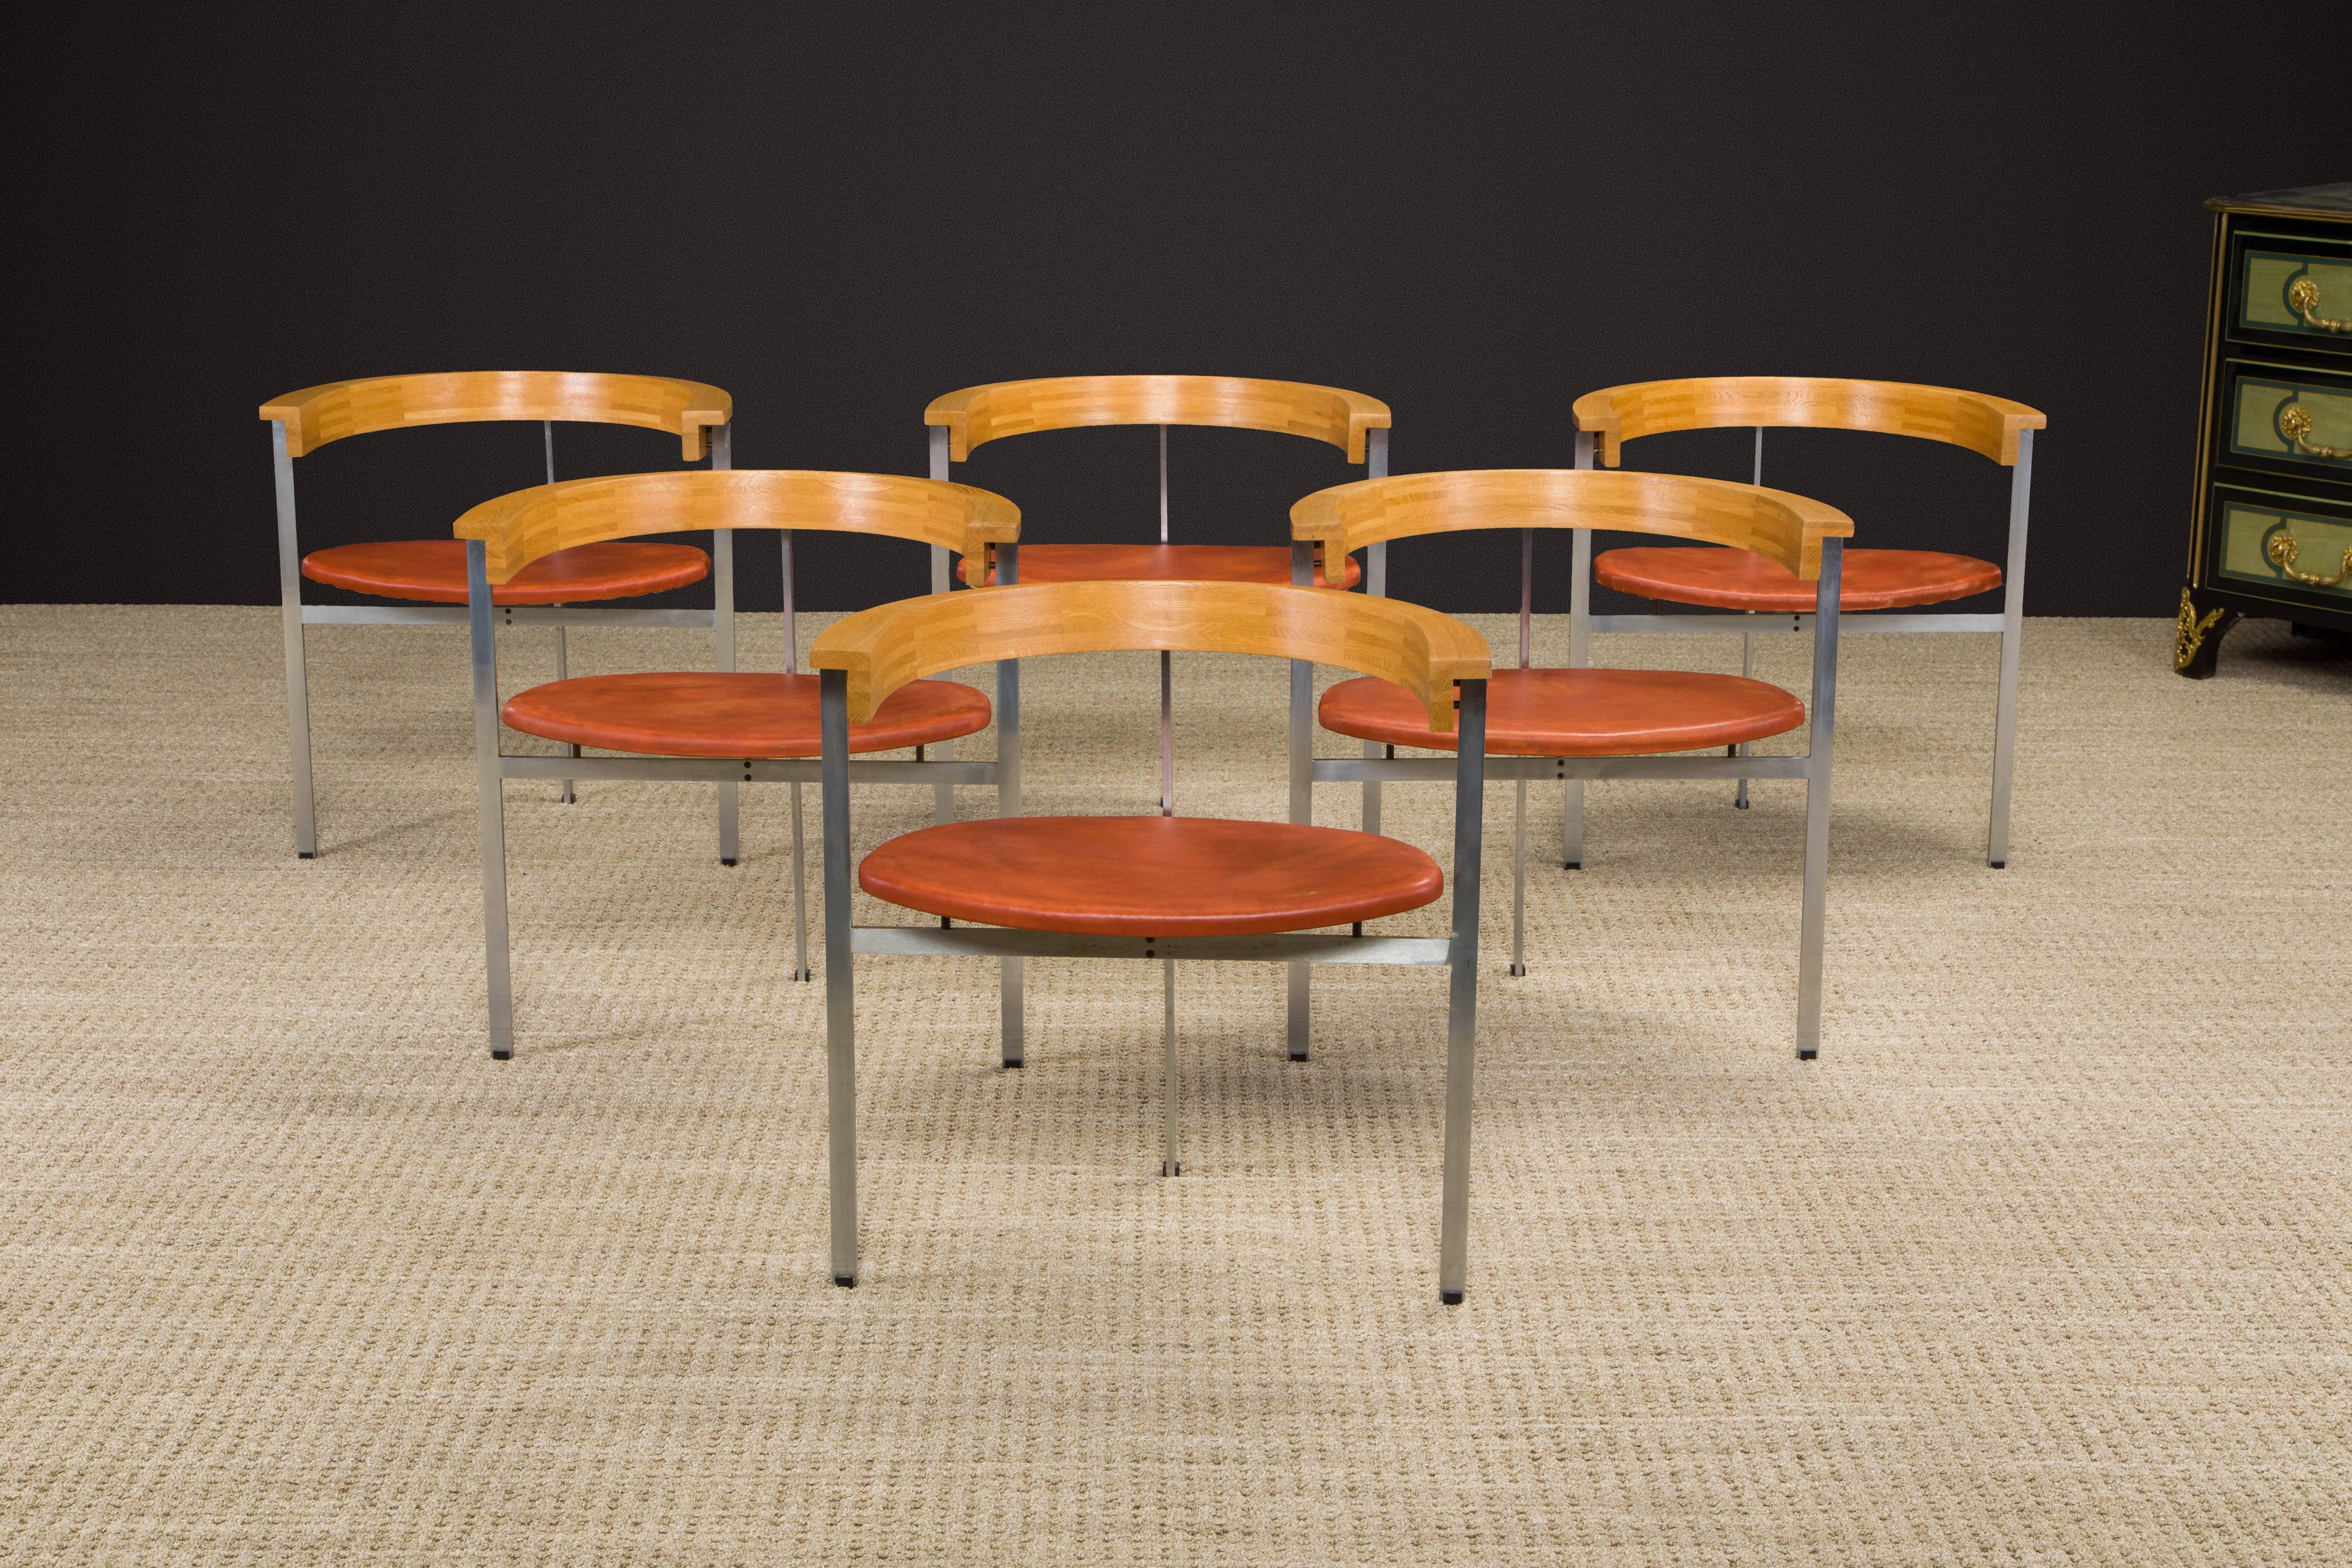 We often acquire incredible collectors pieces and once in a blue moon we can safely say we have a 'best in class' piece. This fine collector's set of six (6) original 'PK-11' armchairs by Poul Kjærholm for E. Kold Christensen are the best we've seen